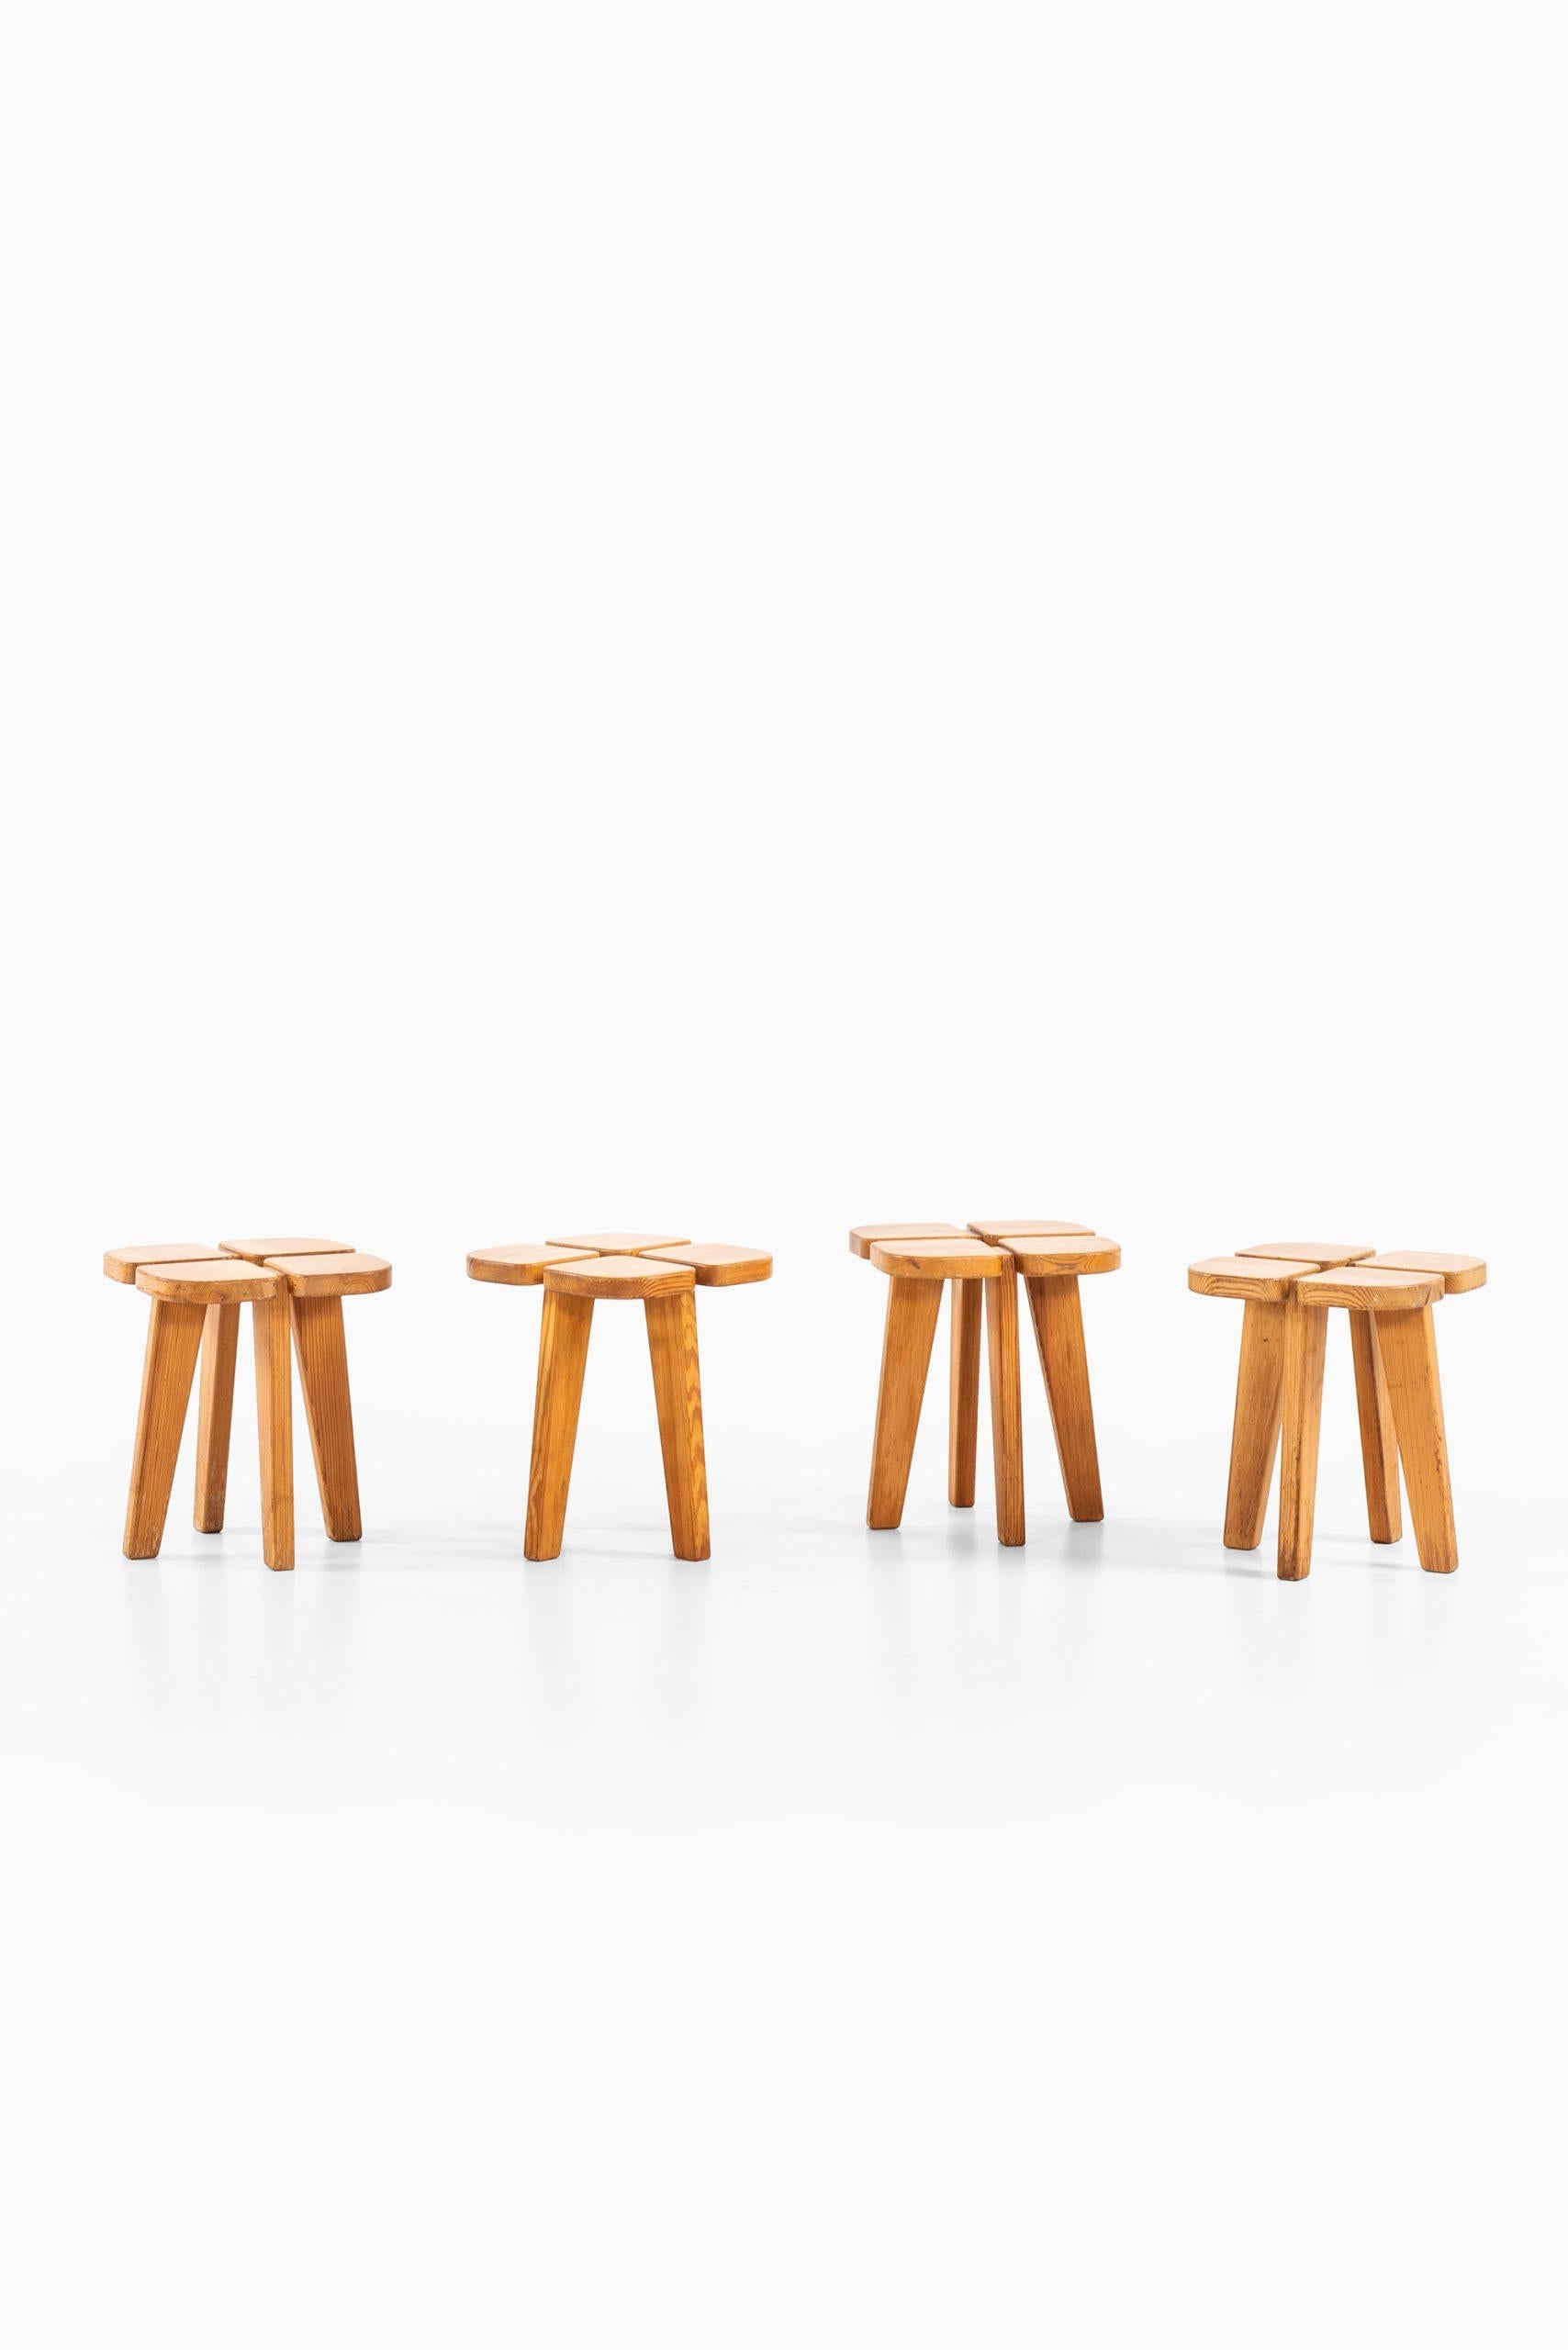 Finnish Lisa Johansson-Pape Stools Model Apila Produced by Stockmann Oy in Finland